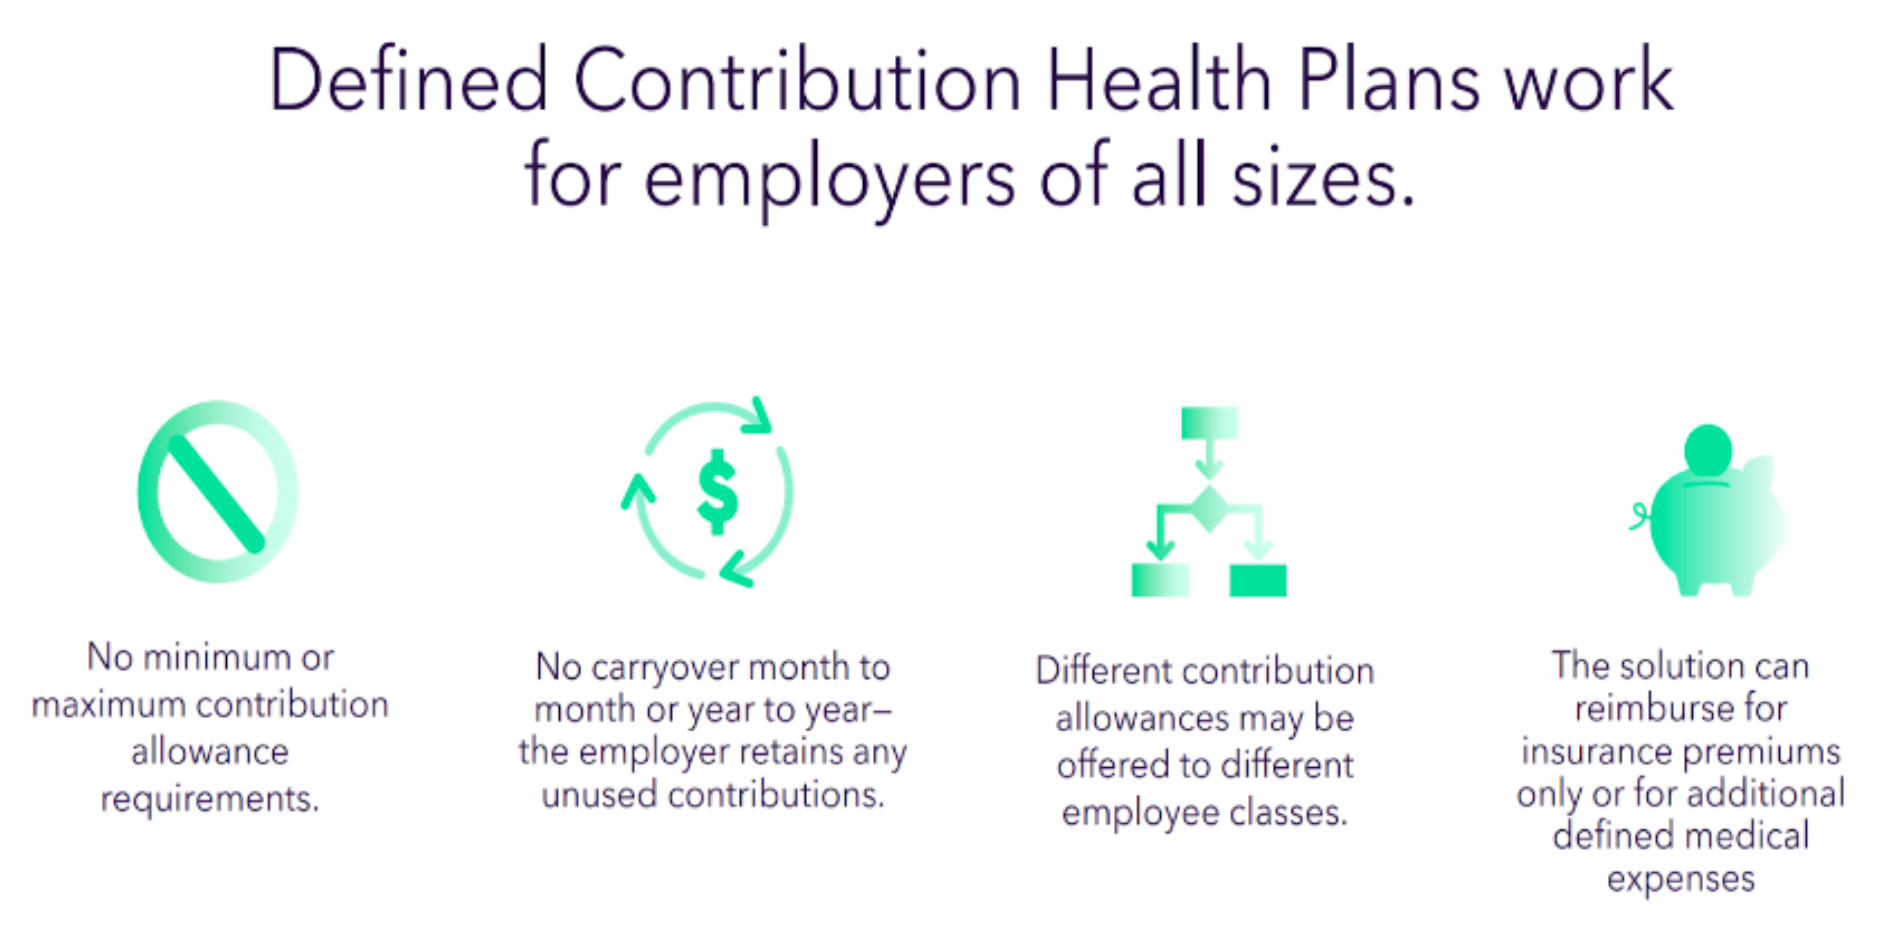 defined contribuition works for employers of all sizes